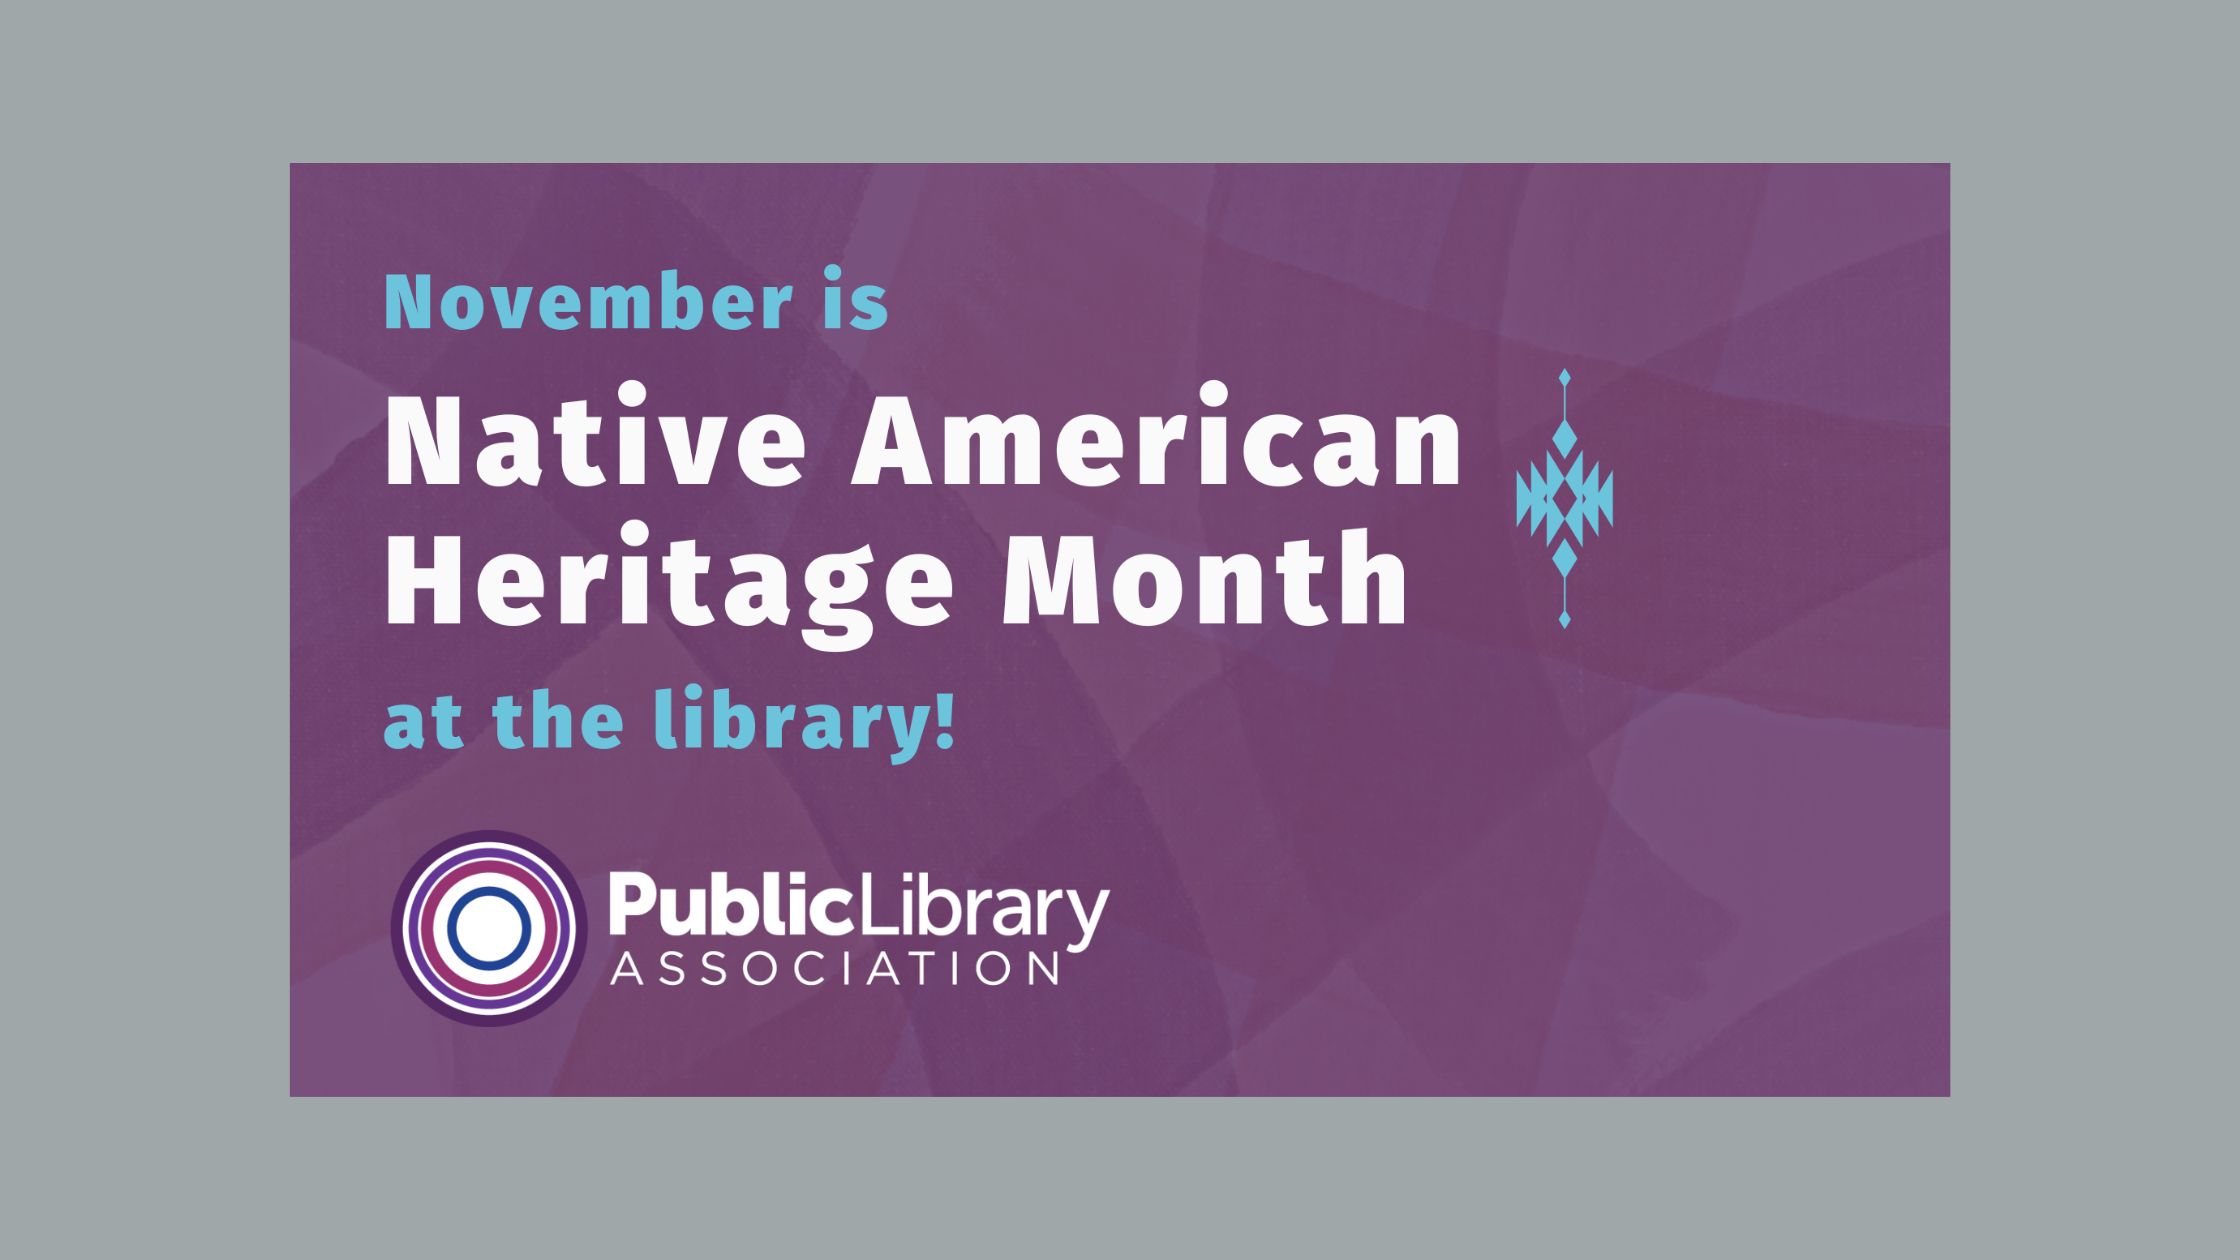 November is Native American Heritage Month at the library! White and blue text on purple background.